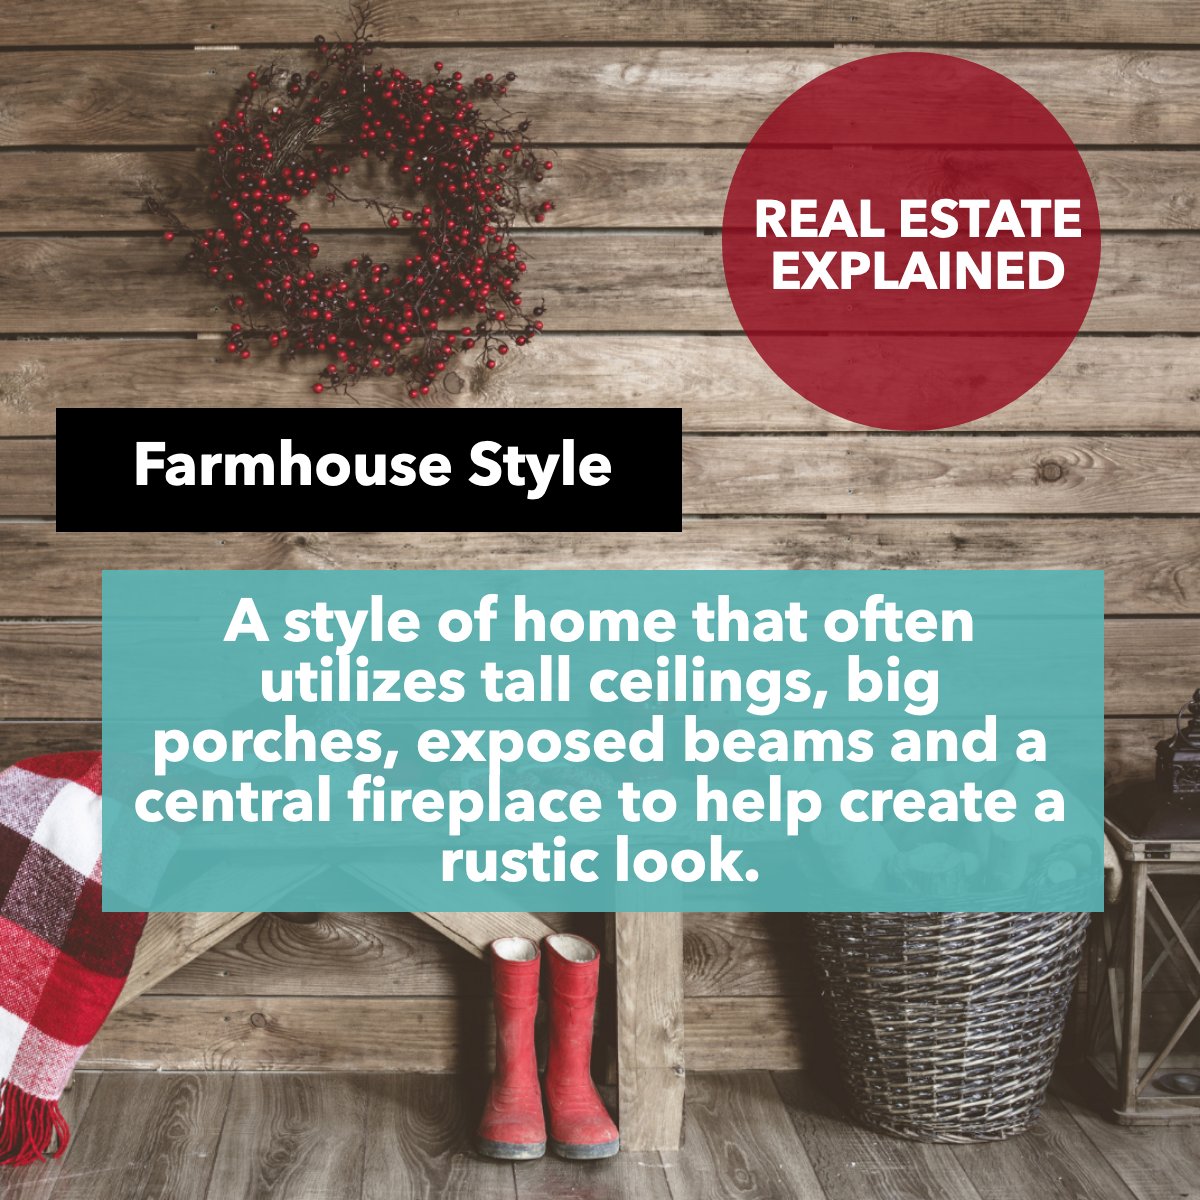 Did you know what a Farmhouse Style is? 🏡

Is this the type of house that you like?

#farmhousestylehome #farmhousestyledesign #farmhousestyleinspired #farmhouseismystyle